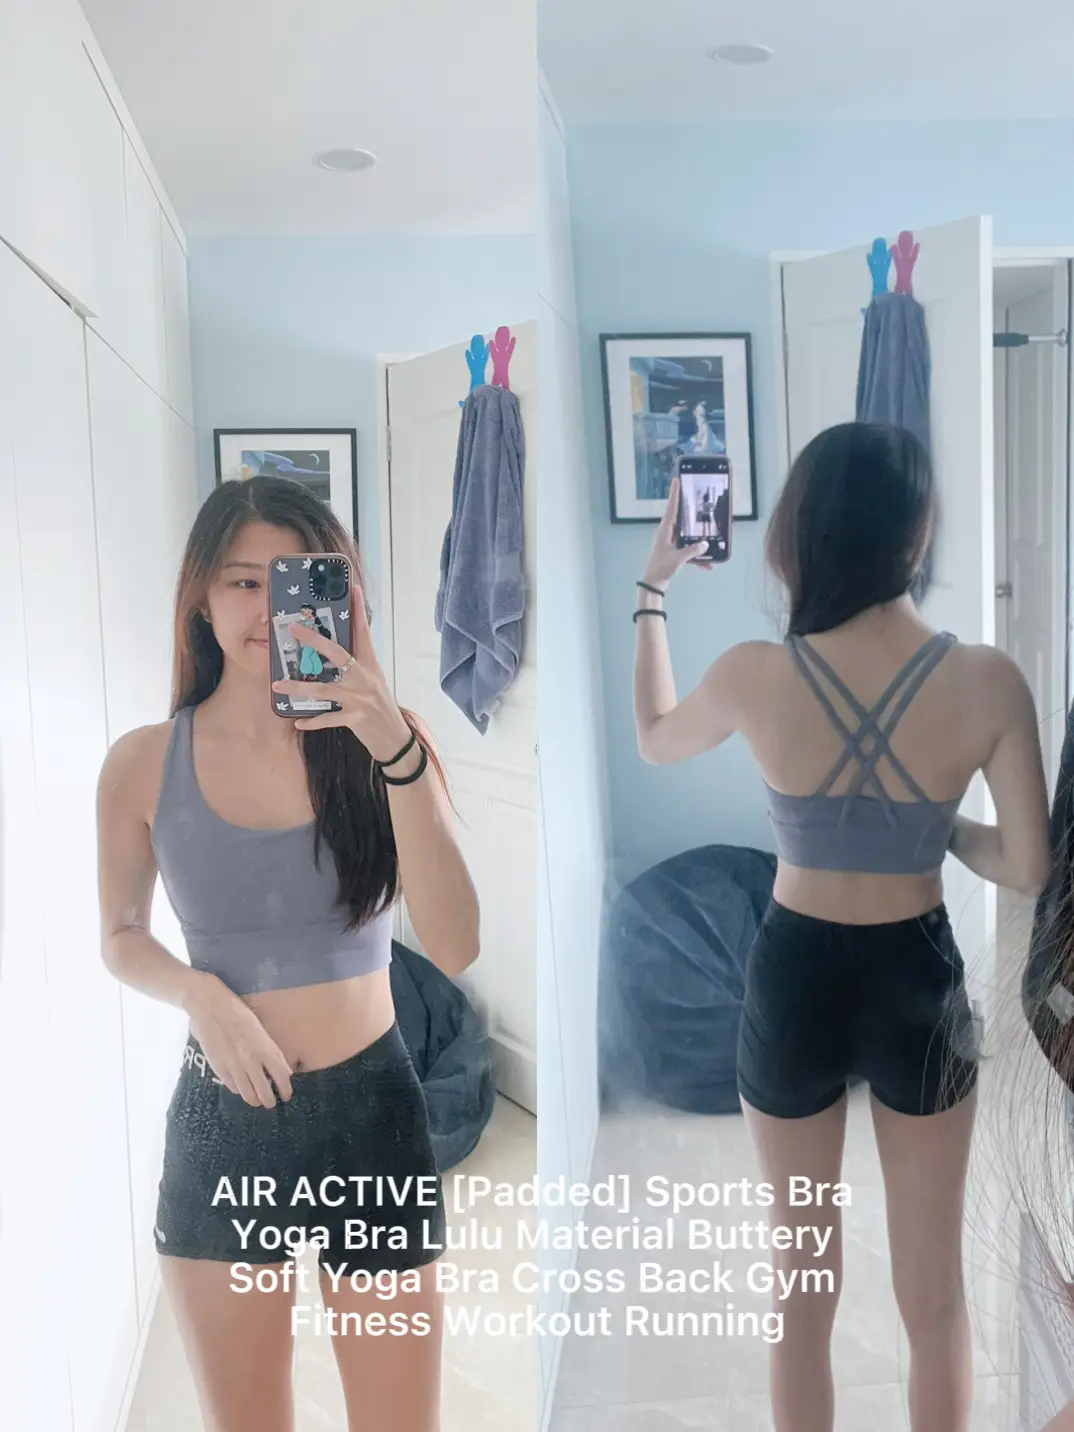 lululemon sports bras for a fraction of the price!, Gallery posted by  Amari